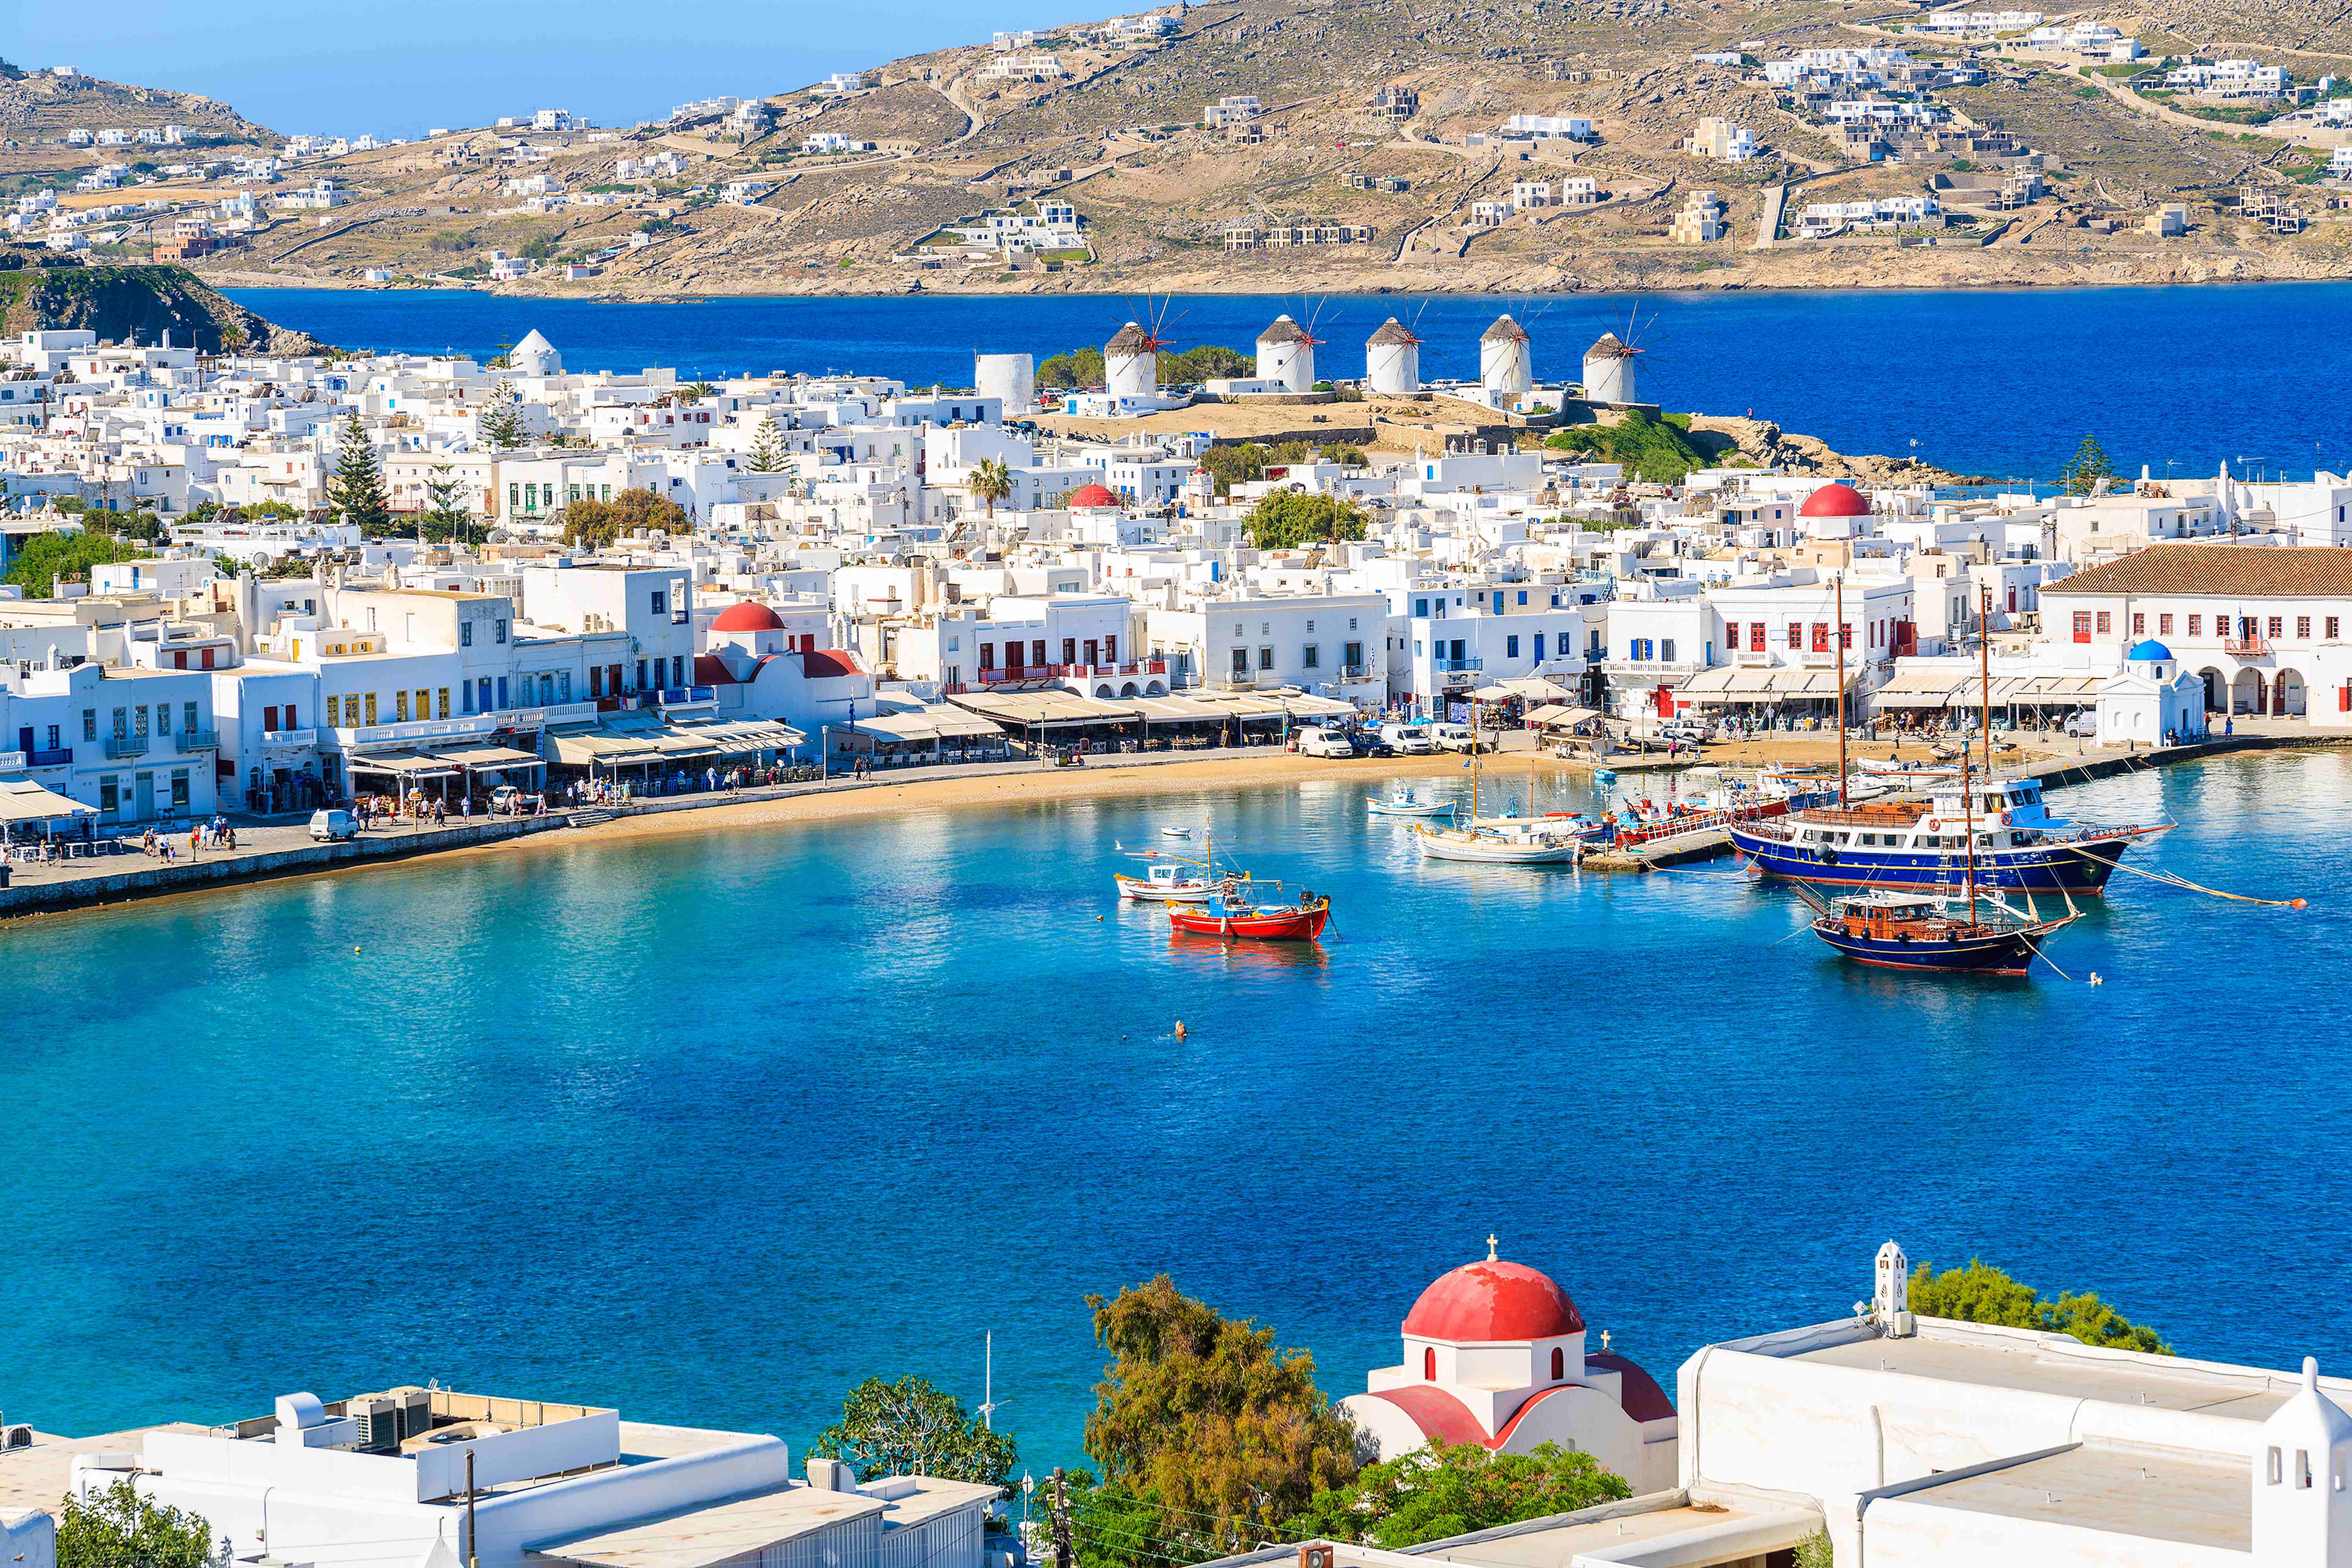 A view of Mykonos port with boats, Cyclades islands, Greece.jpg